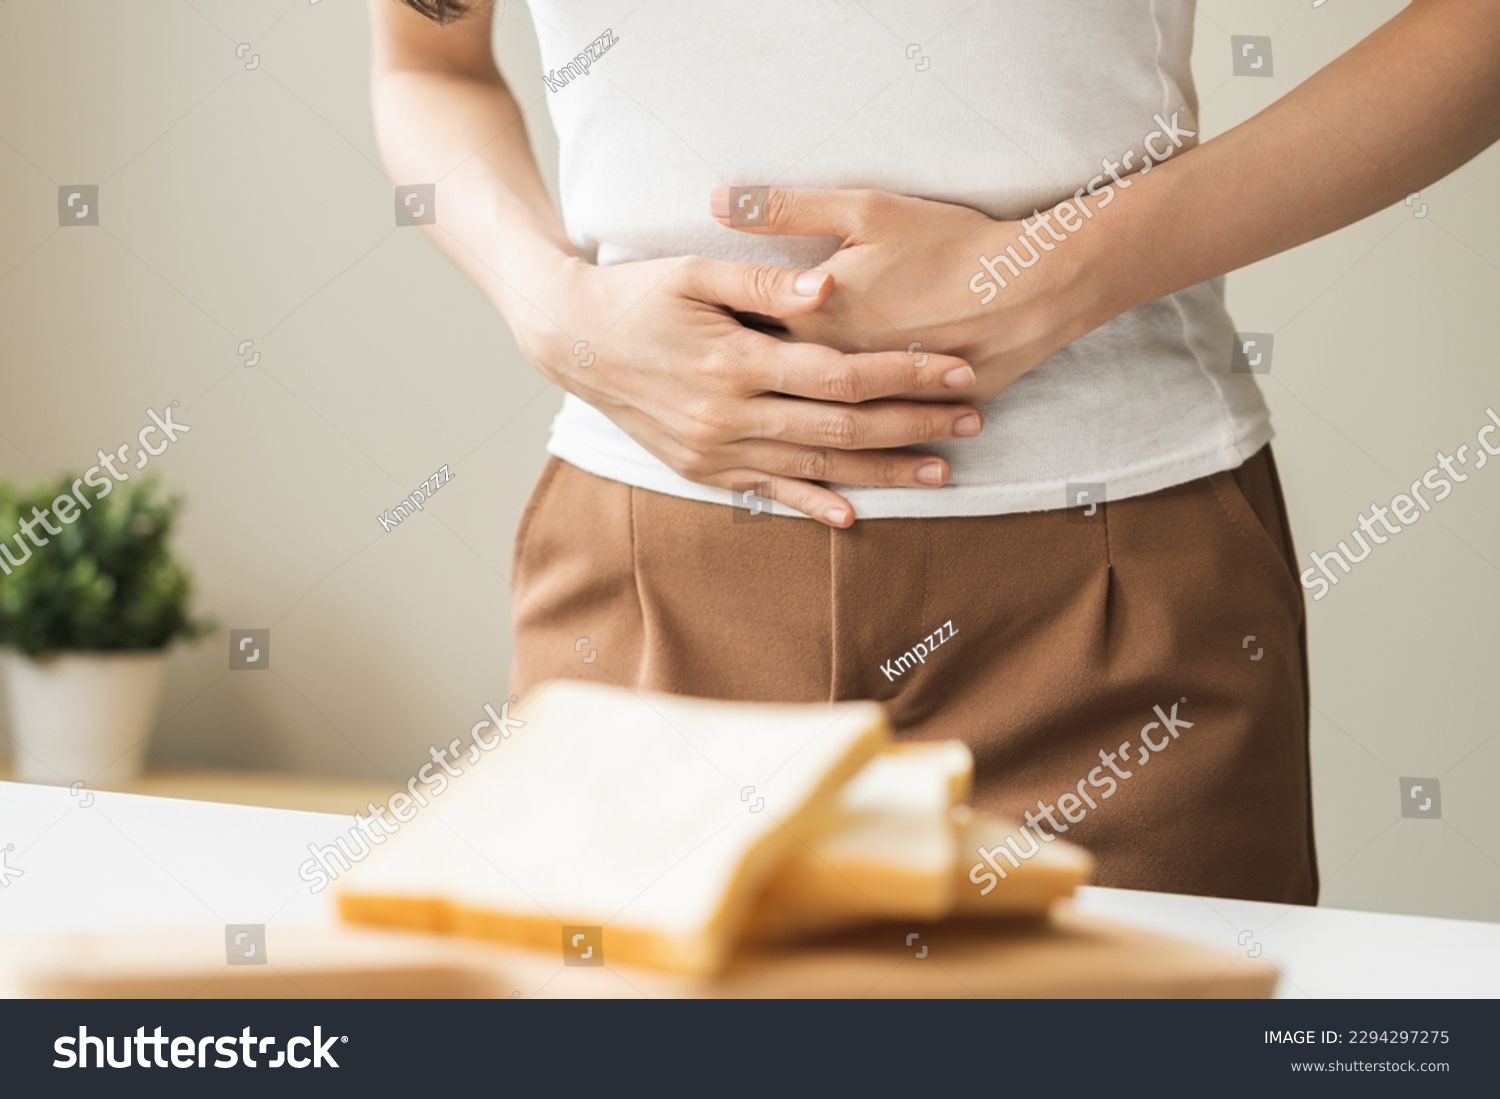 Gluten allergy, asian young woman hand holding, refusing to eat white bread slice on plate in breakfast food meal at home, girl having a stomach ache. Gluten intolerant and Gluten free diet concept. #2294297275